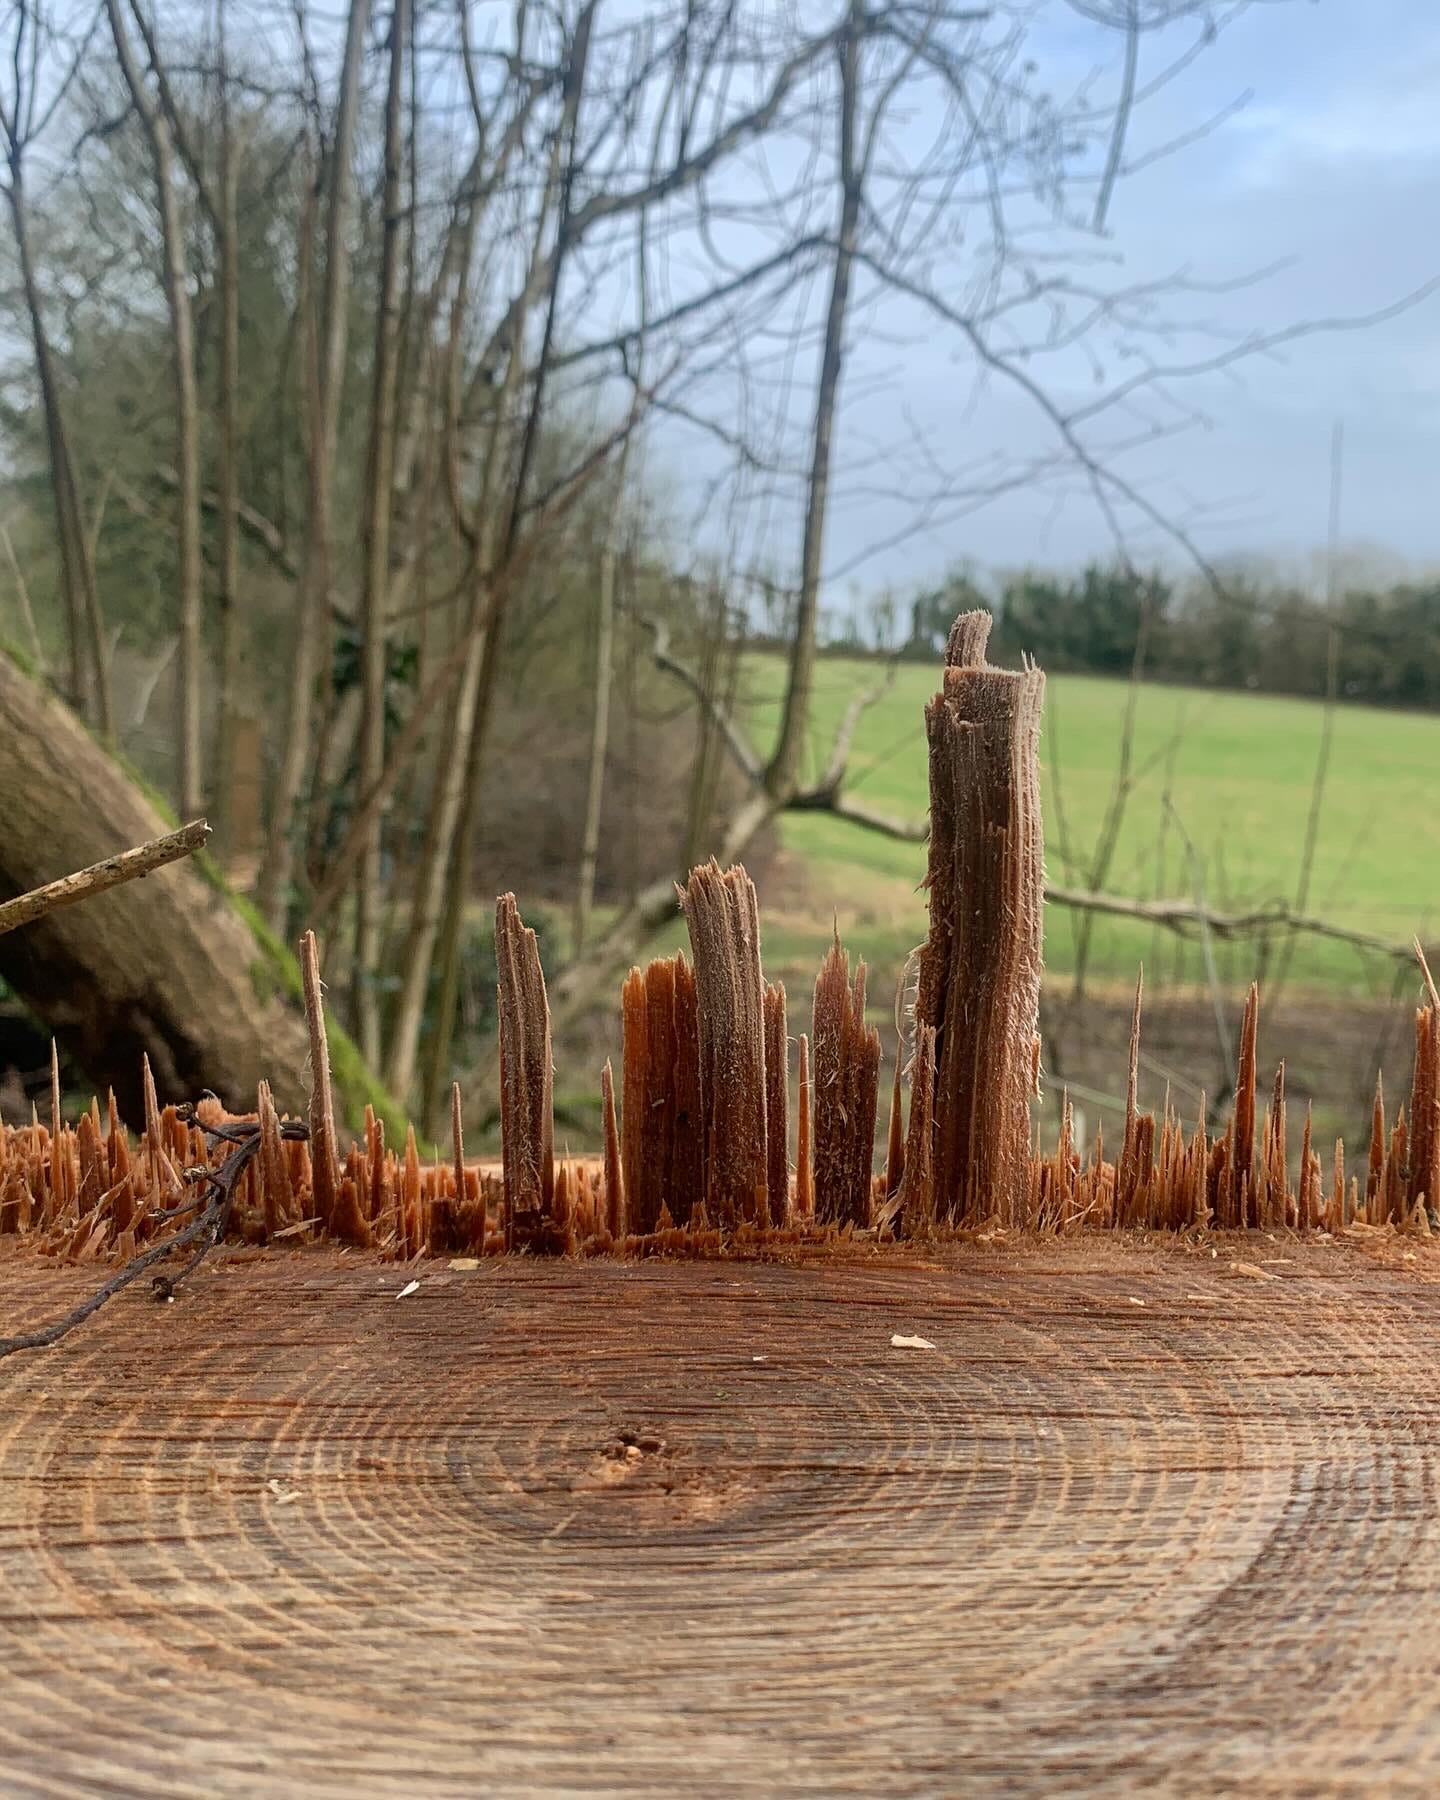 A photo of a tree stump with a line of splinters standing up straight like a cityscape